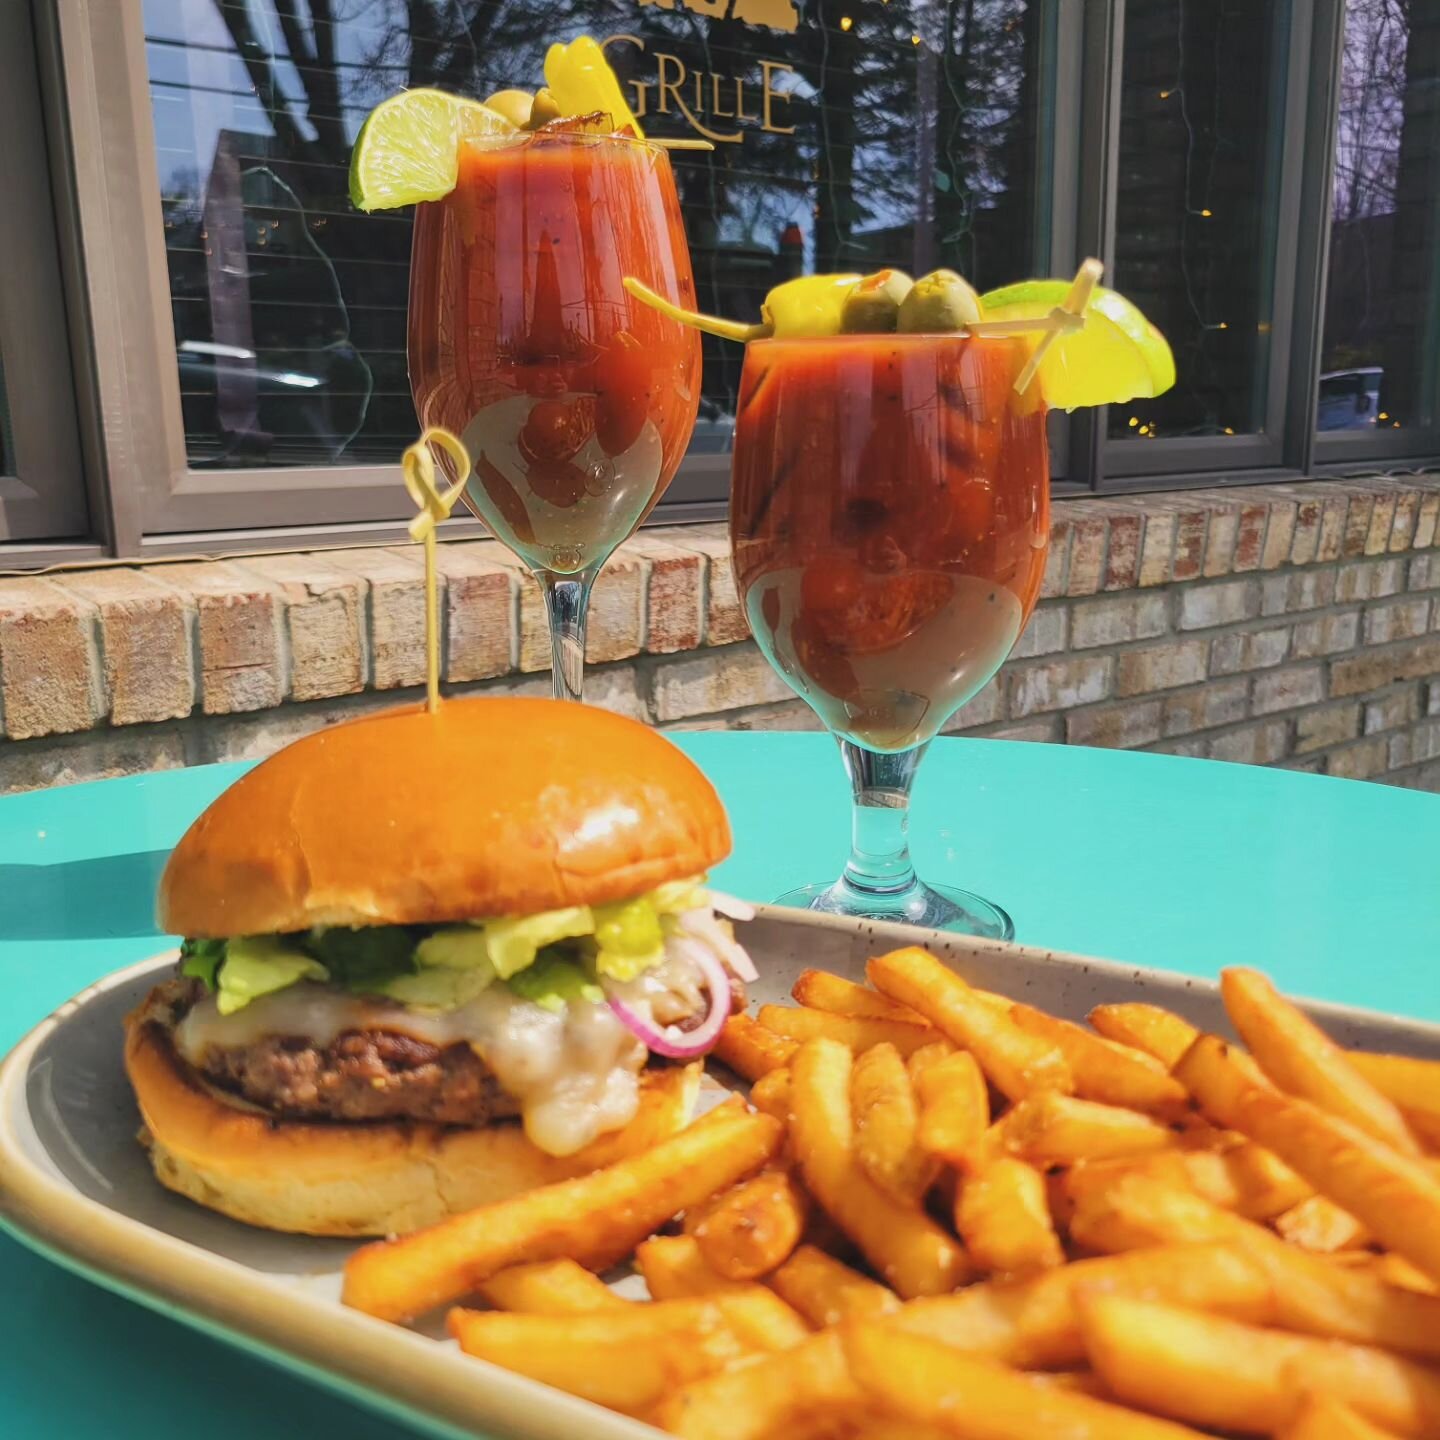 We're open on Sundays from 11:30am to 8:30pm! We'll be doing smashburgers and $2 off bloody mary's all day plus some brunch specials until 3pm! Hope to see you then ✨️

#blowingrock #blowingrocknc #familyowned #supportlocal #smashburger #bloodymary #